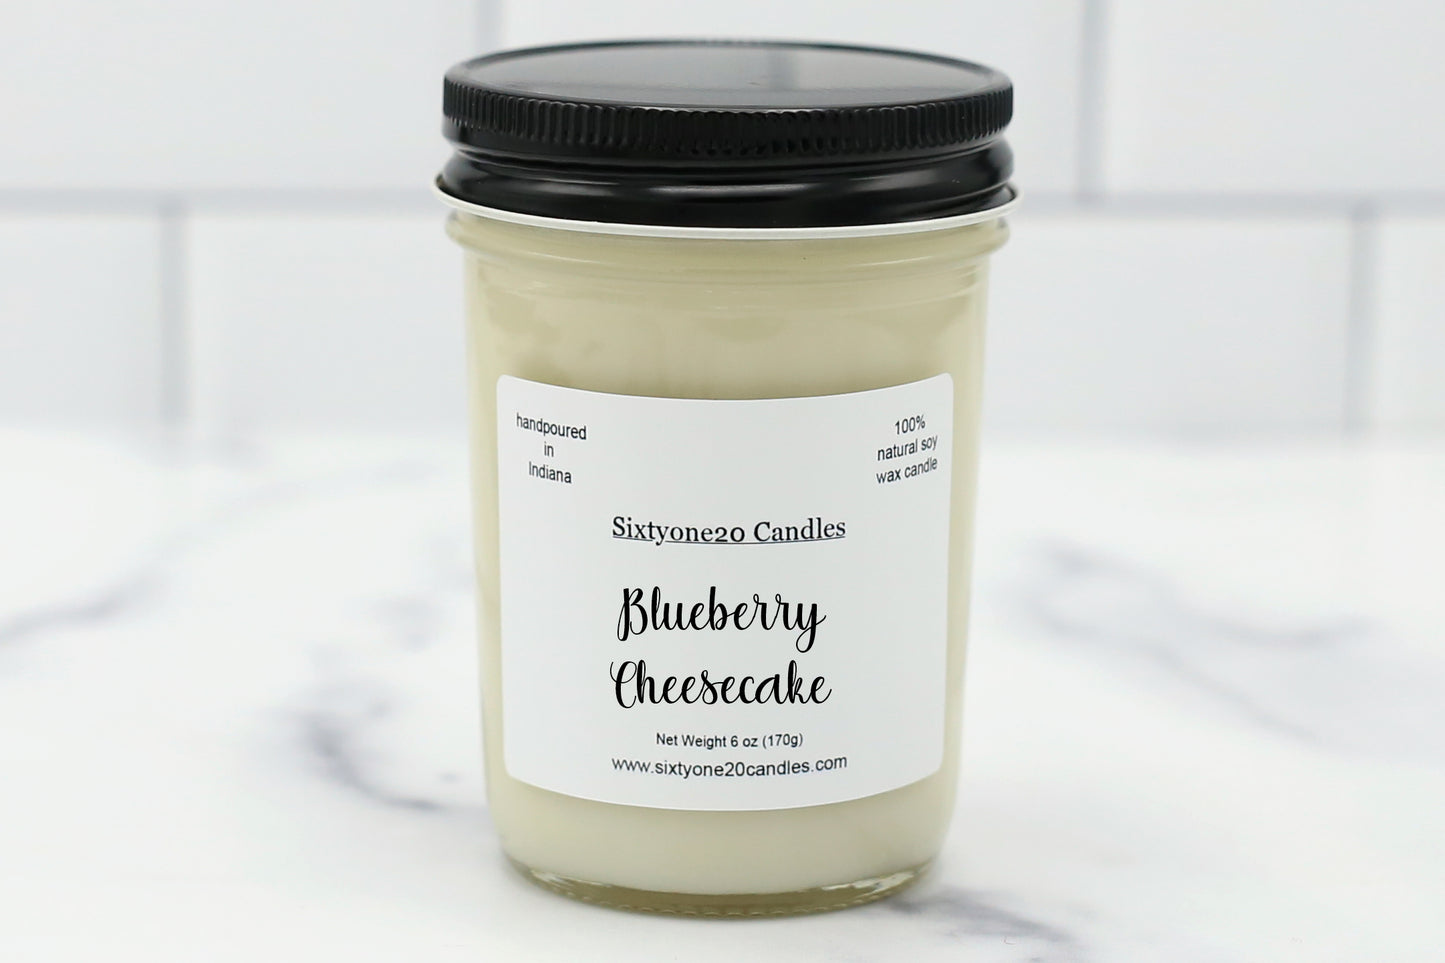 Blueberry Cheesecake 6 oz net weight soy wax candle